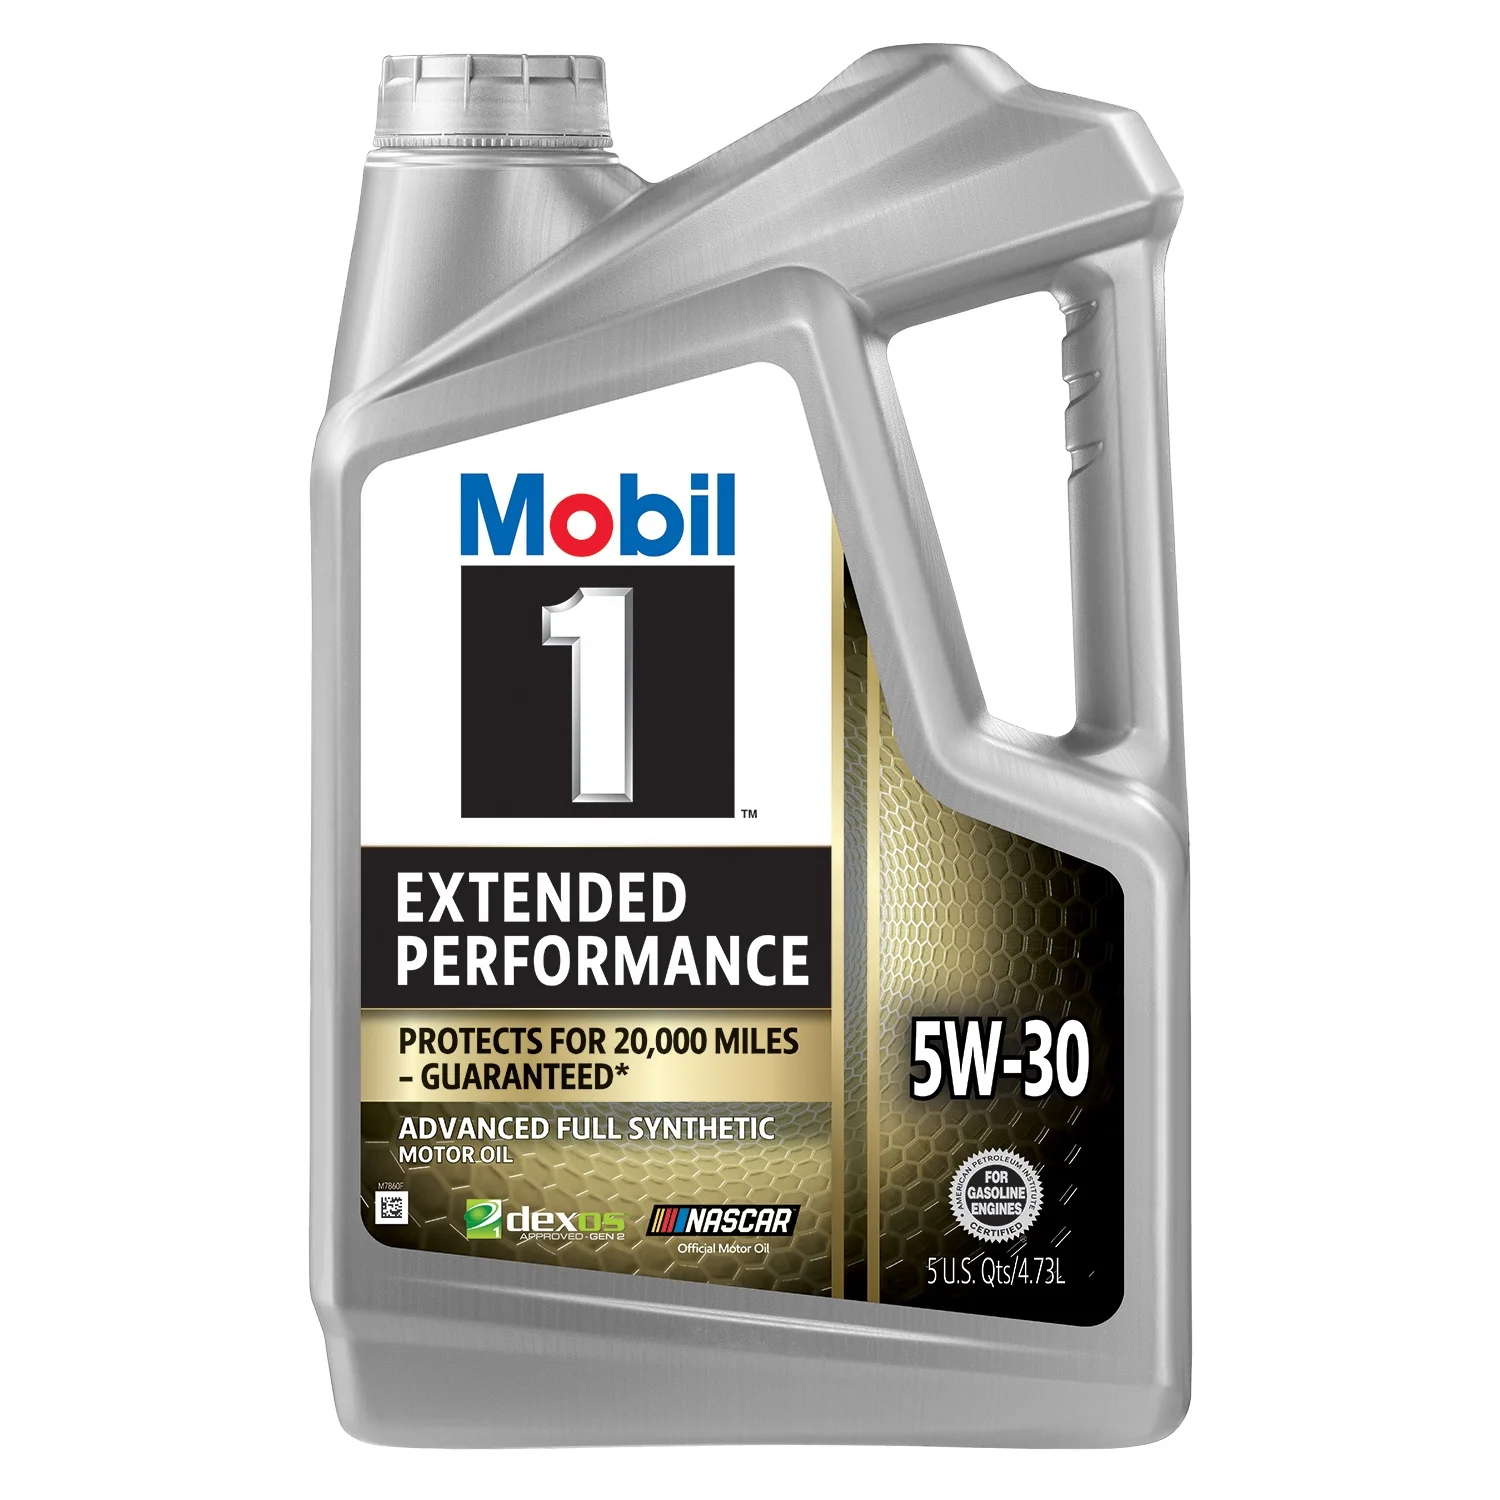 Mobil 1 5W30 Extended Performance Synthetic Motor Oil – 5 Quart (Pack of 3)